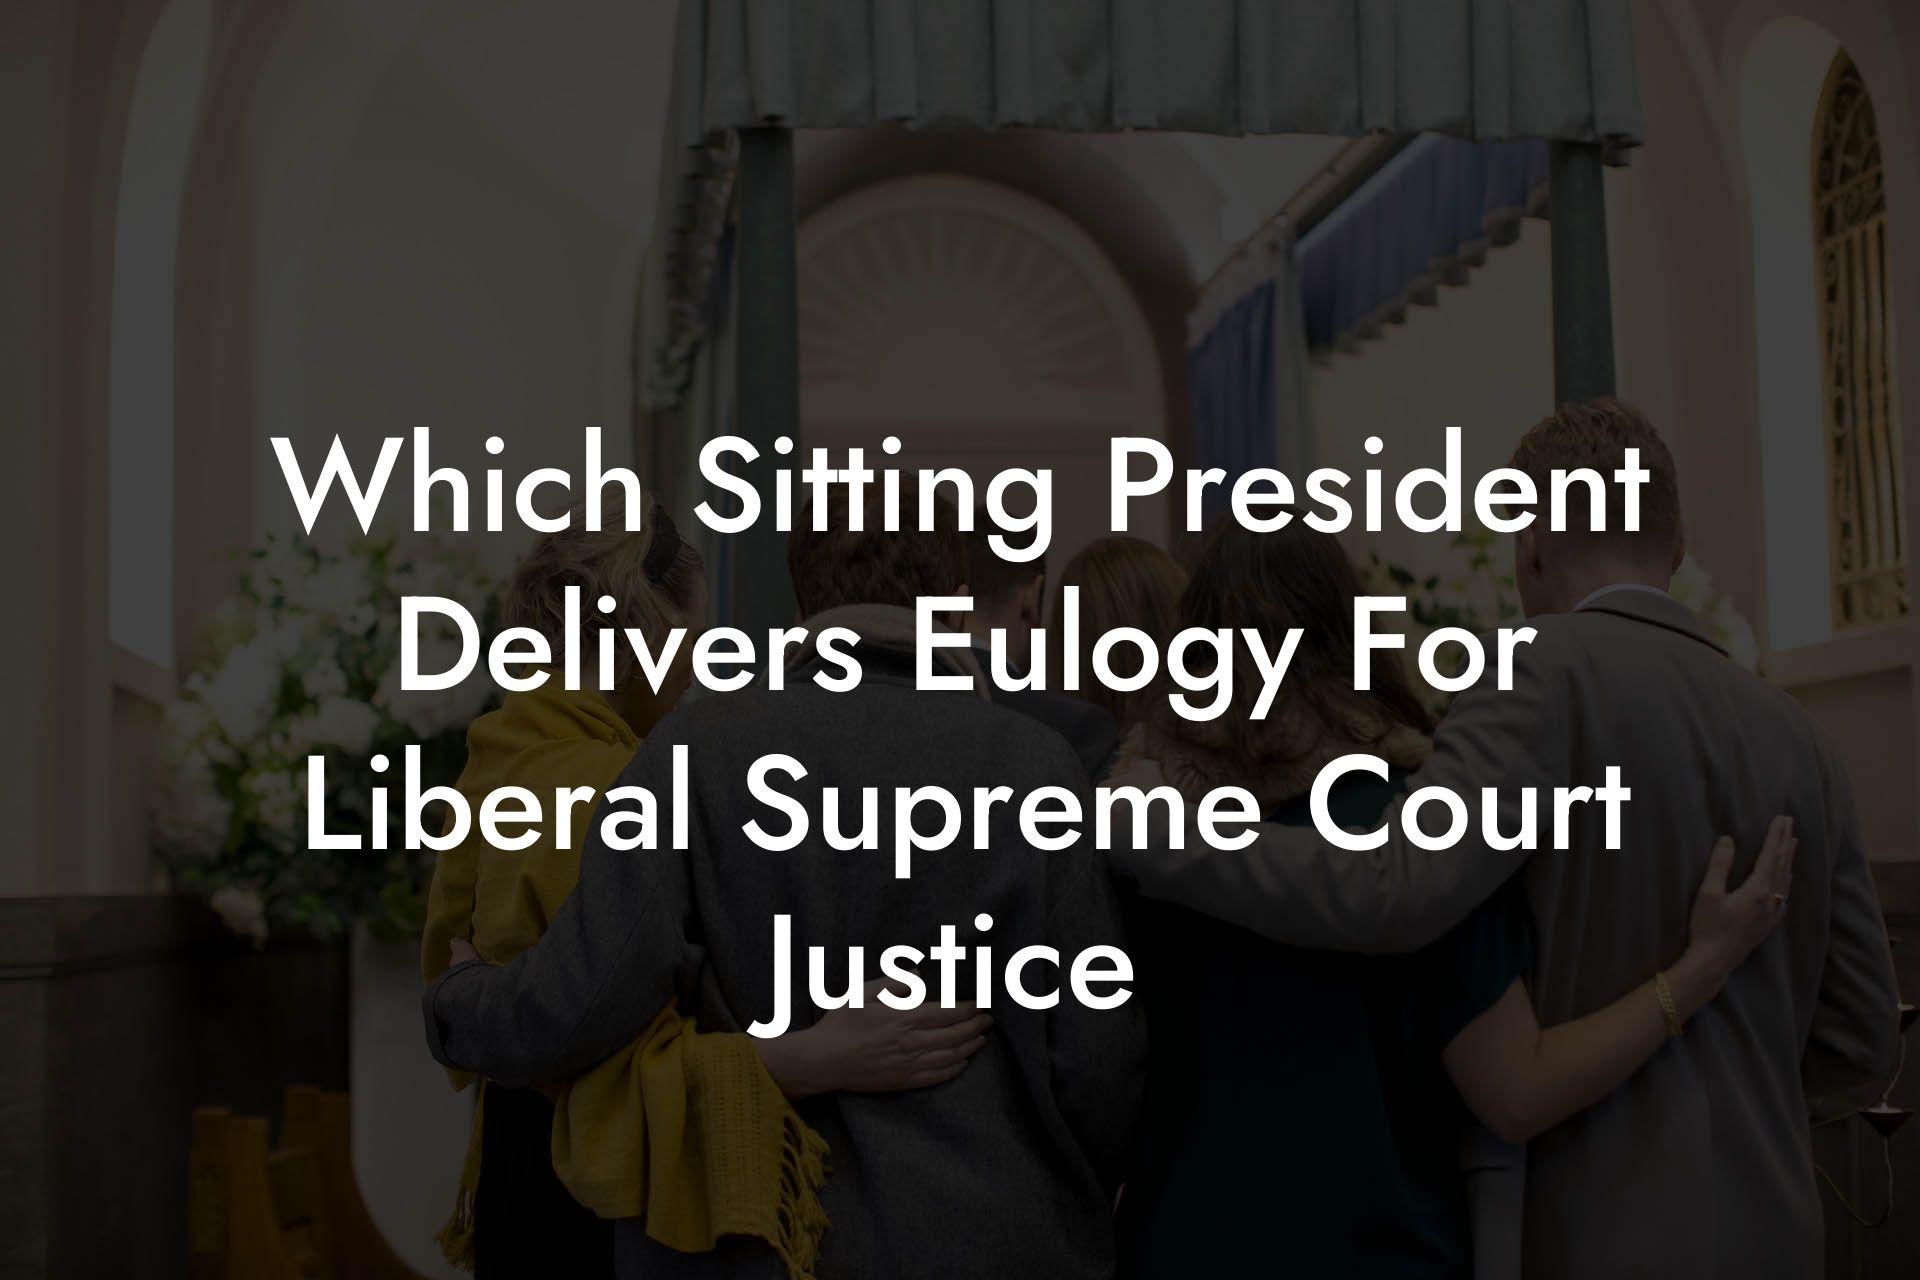 Which Sitting President Delivers Eulogy For Liberal Supreme Court Justice